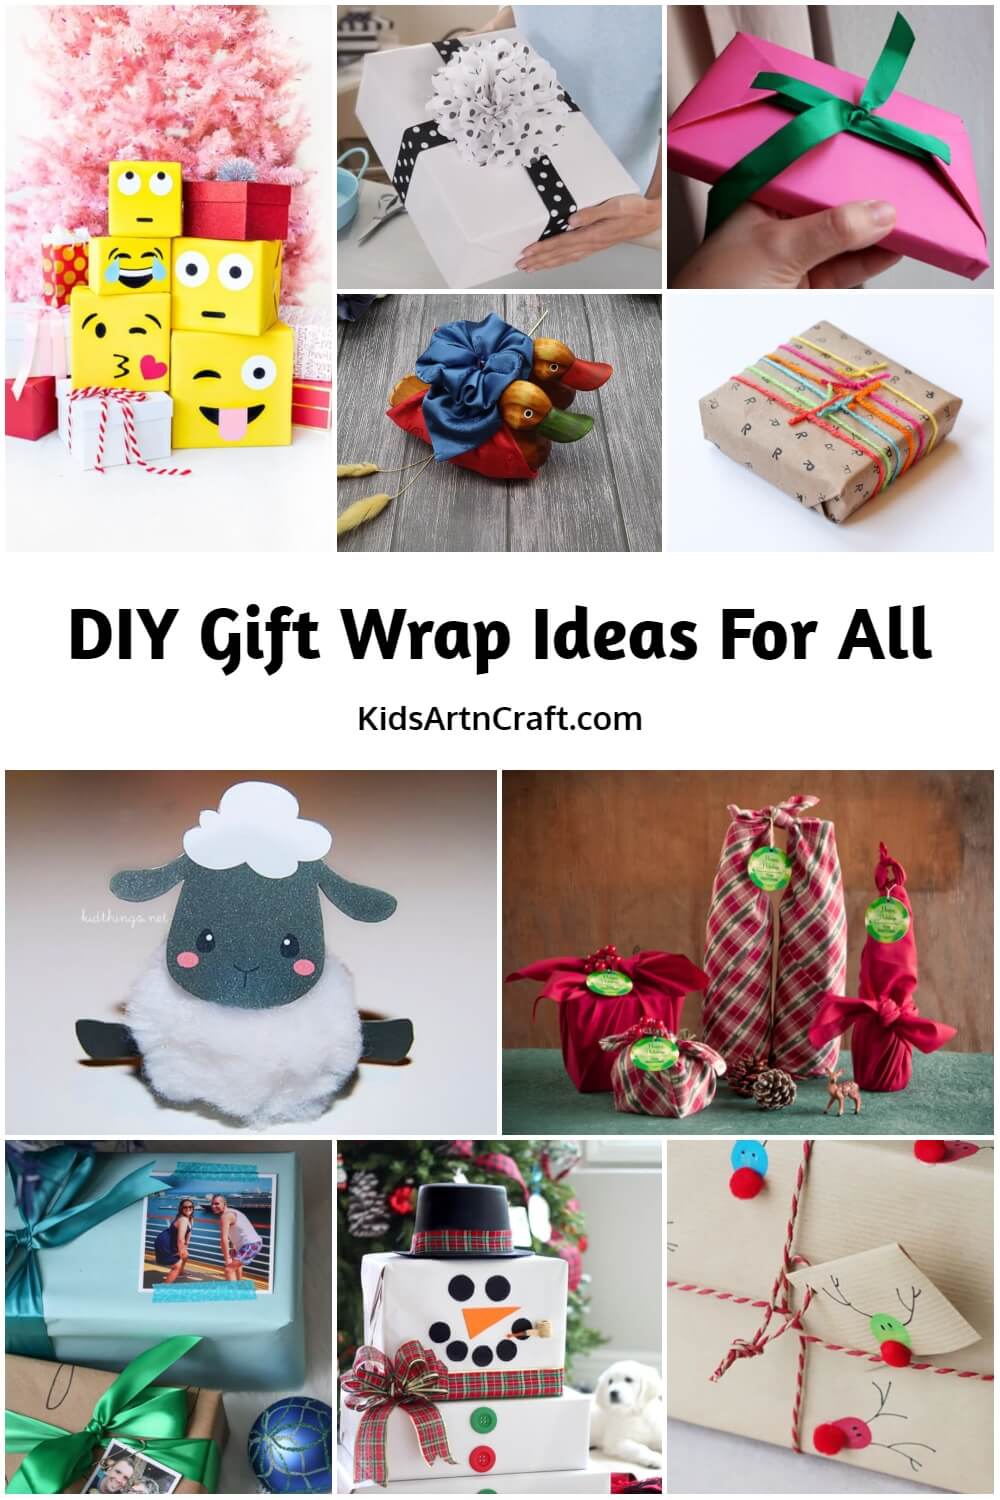 DIY Gift Wrap Ideas For All